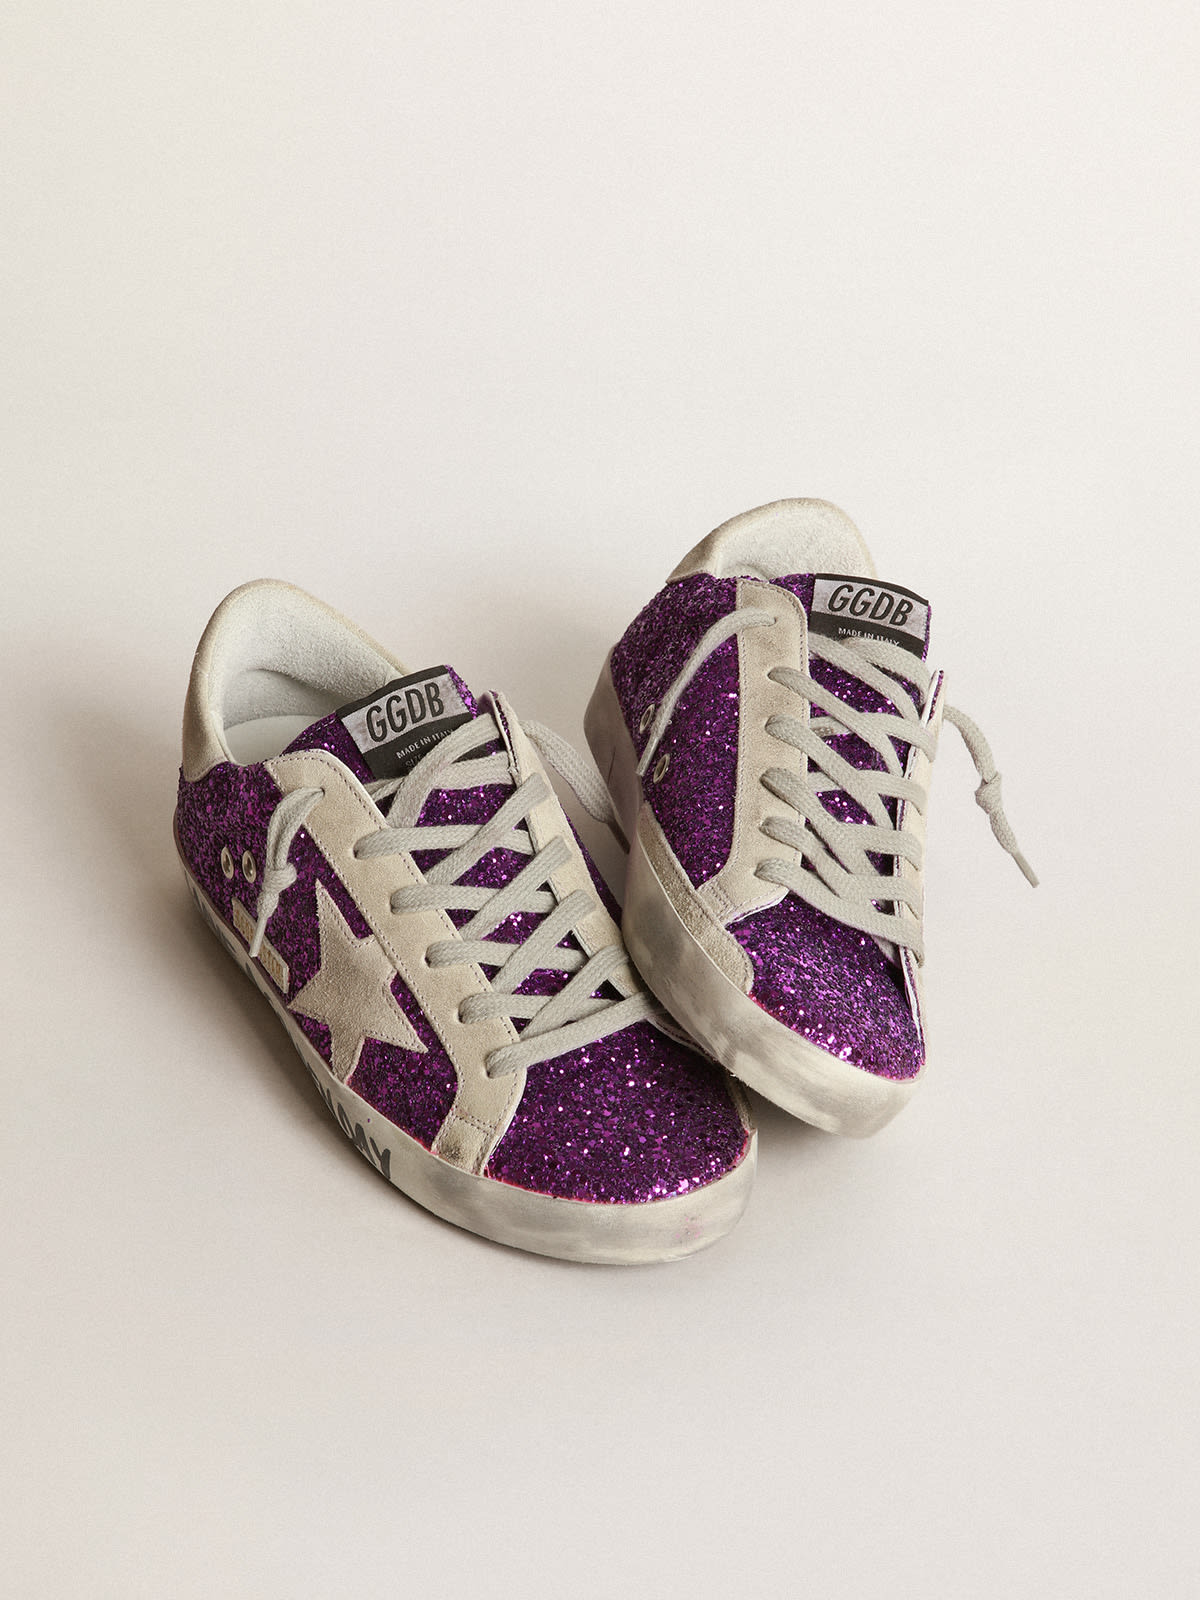 Golden Goose - Super-Star sneakers with purple glitter and lettering on the foxing in 